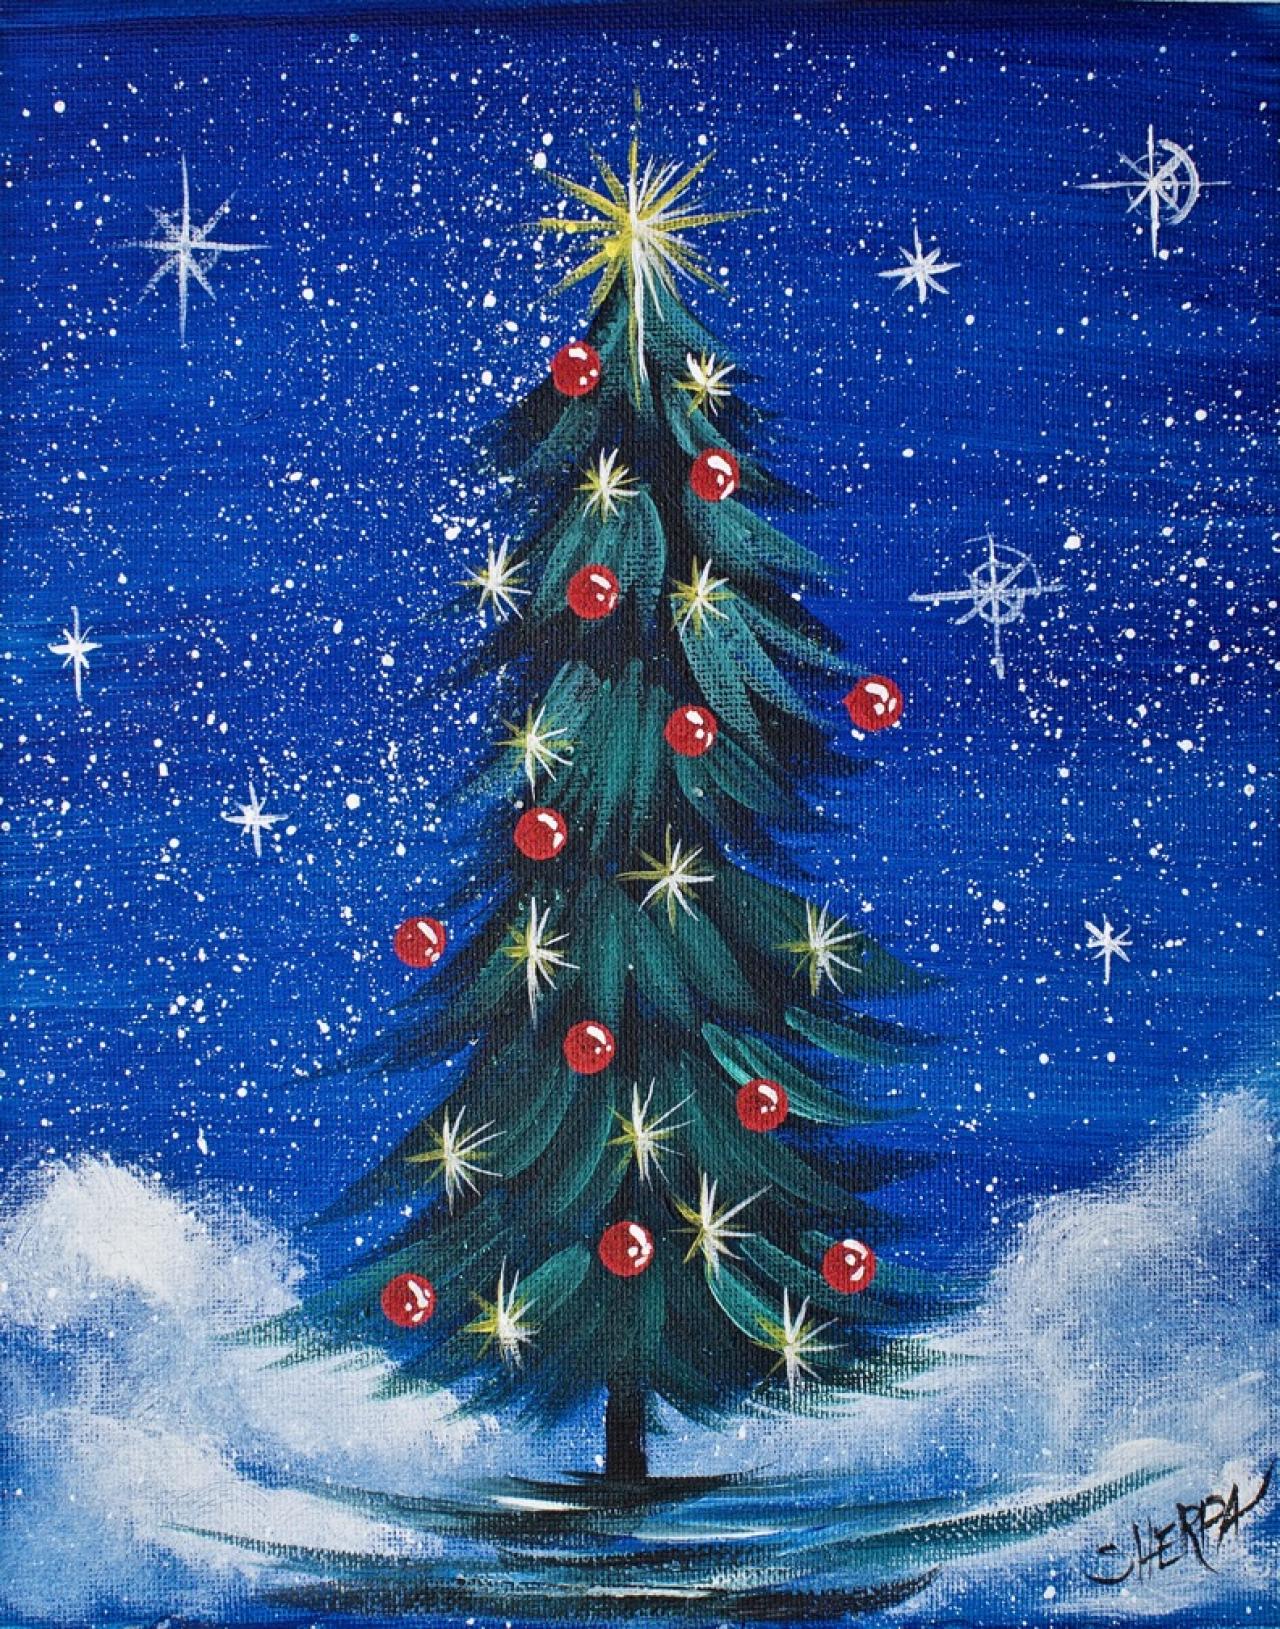 Simple Christmas TREE Step By Step Acrylic Painting On Canvas For ...